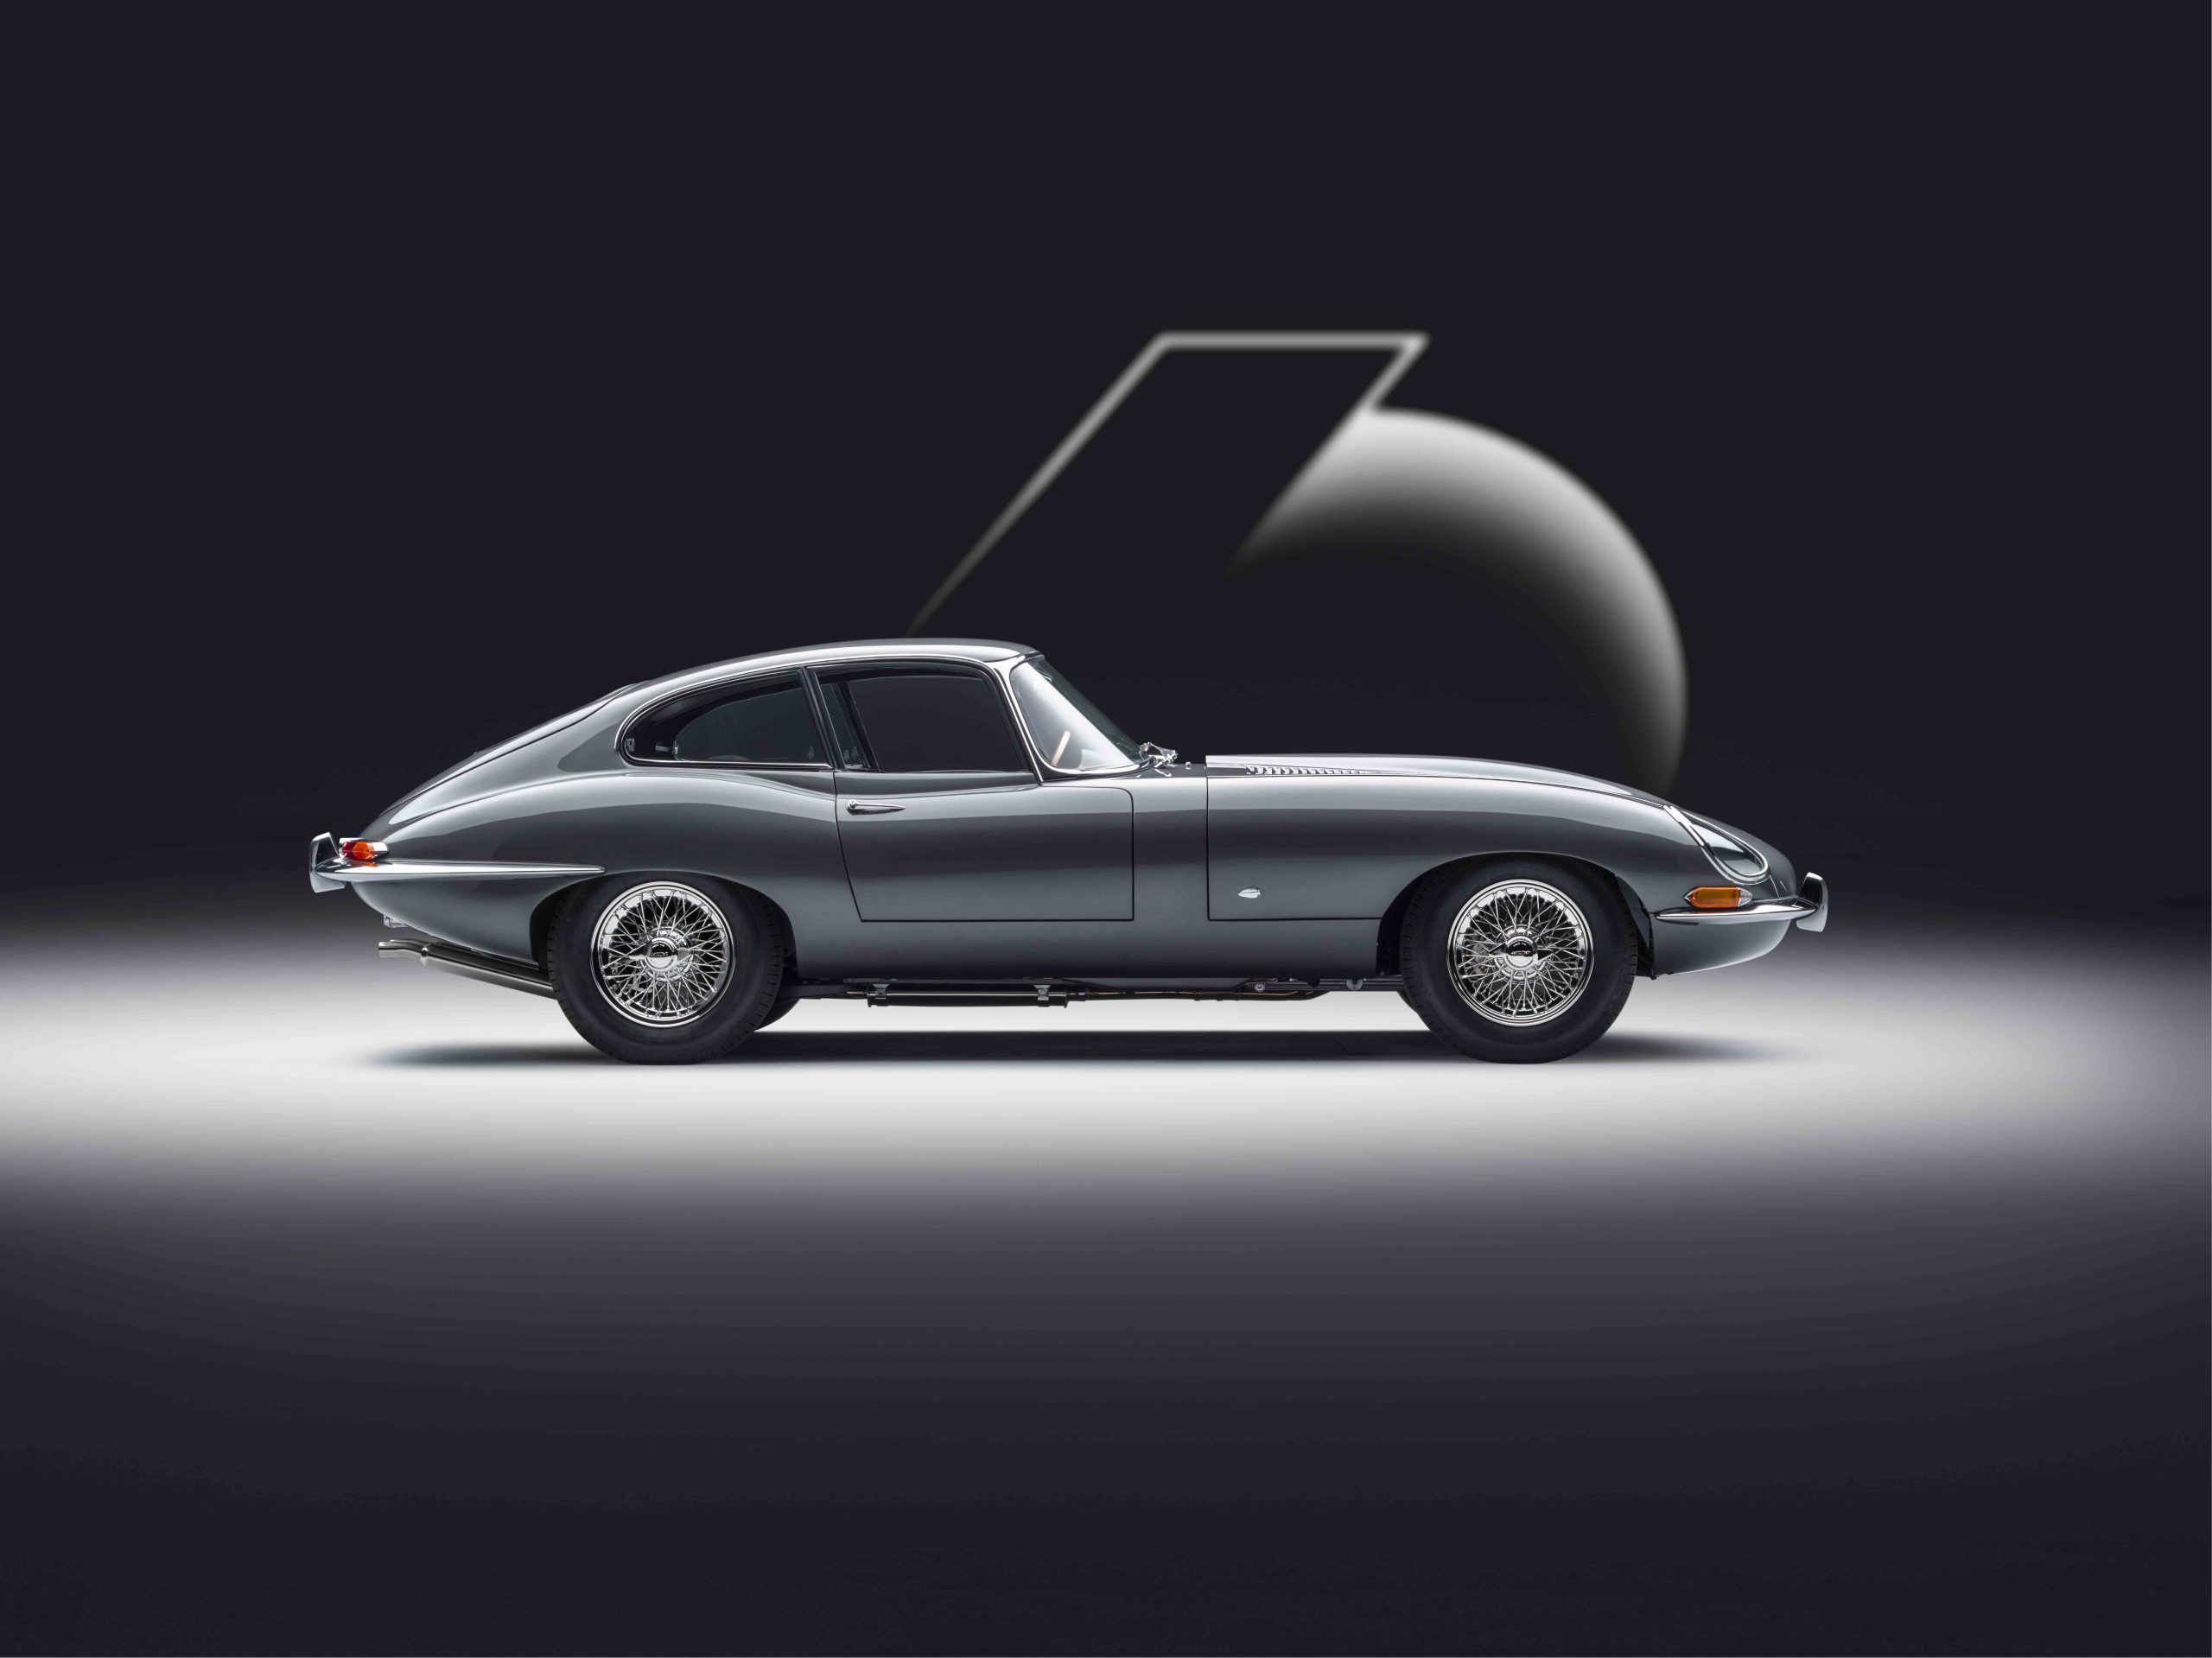 Jaguar E-type – the full story of the most beautiful British